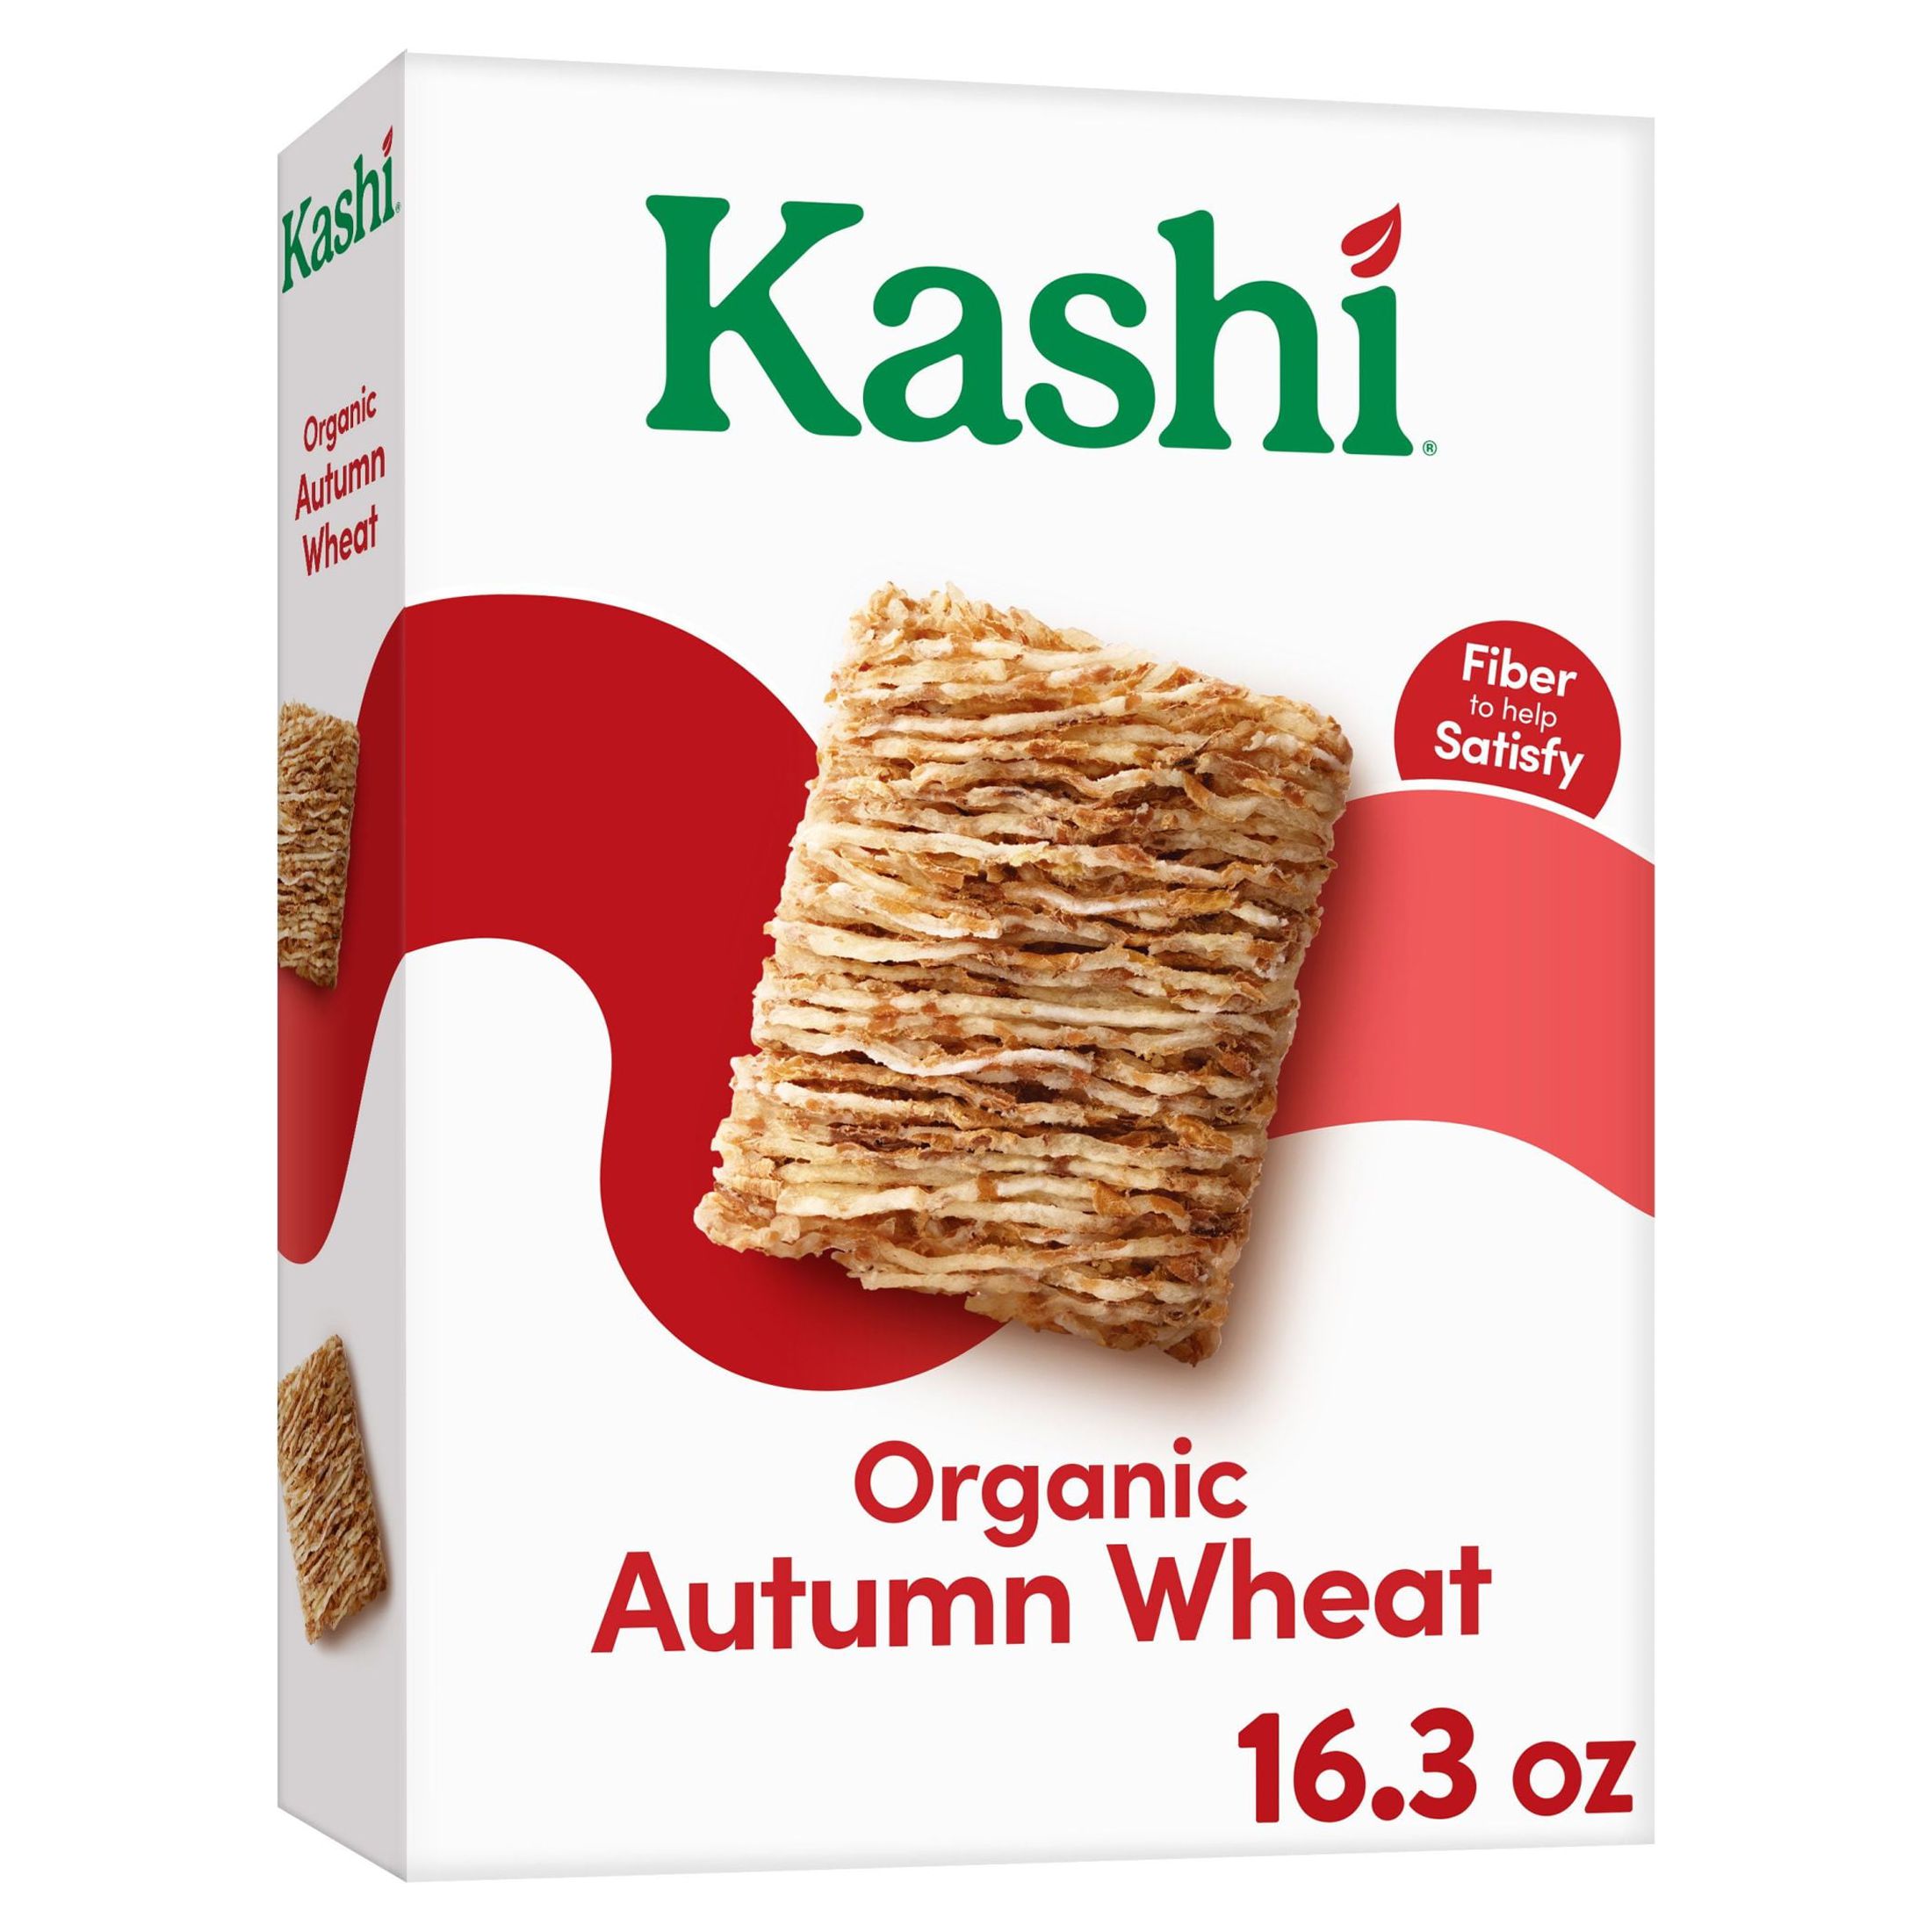 Kashi Autumn Wheat Cold Breakfast Cereal, 16.3 oz Box - image 1 of 12